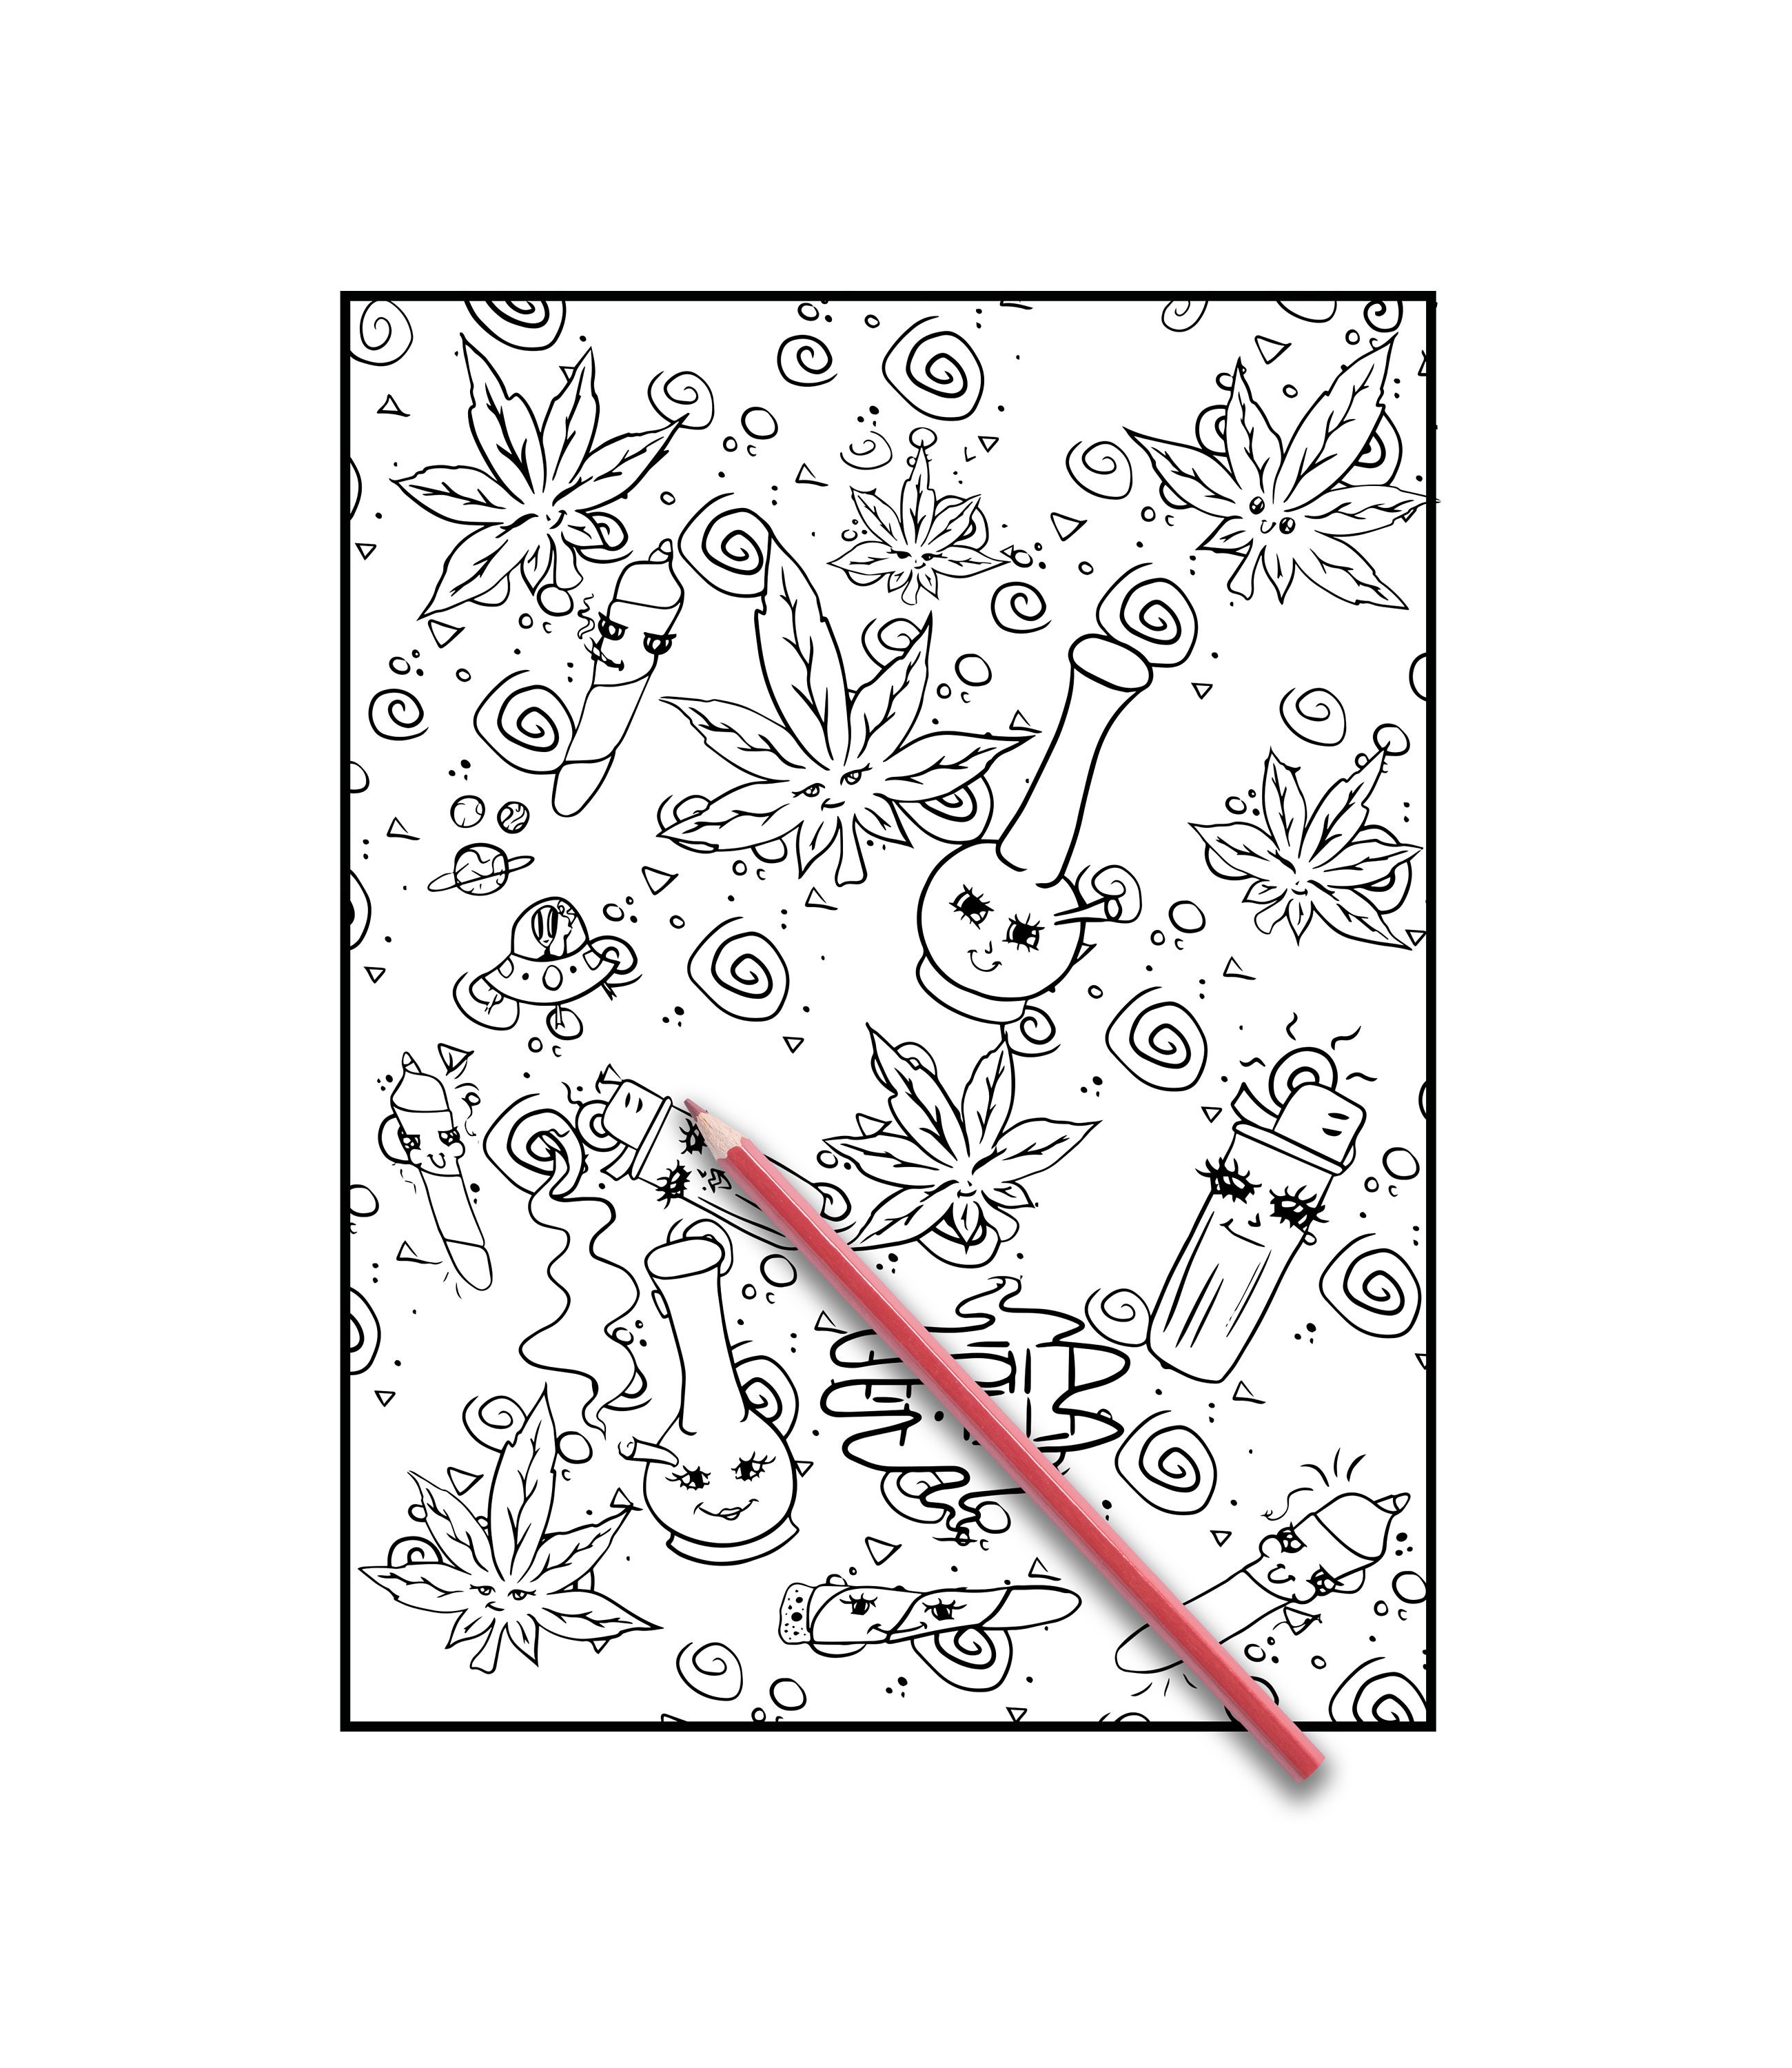 Stoner coloring page, colouring page for adults Stoner Coloring Book for  Adults, weed stuff, adult coloring book, stoner gift, marijuana art